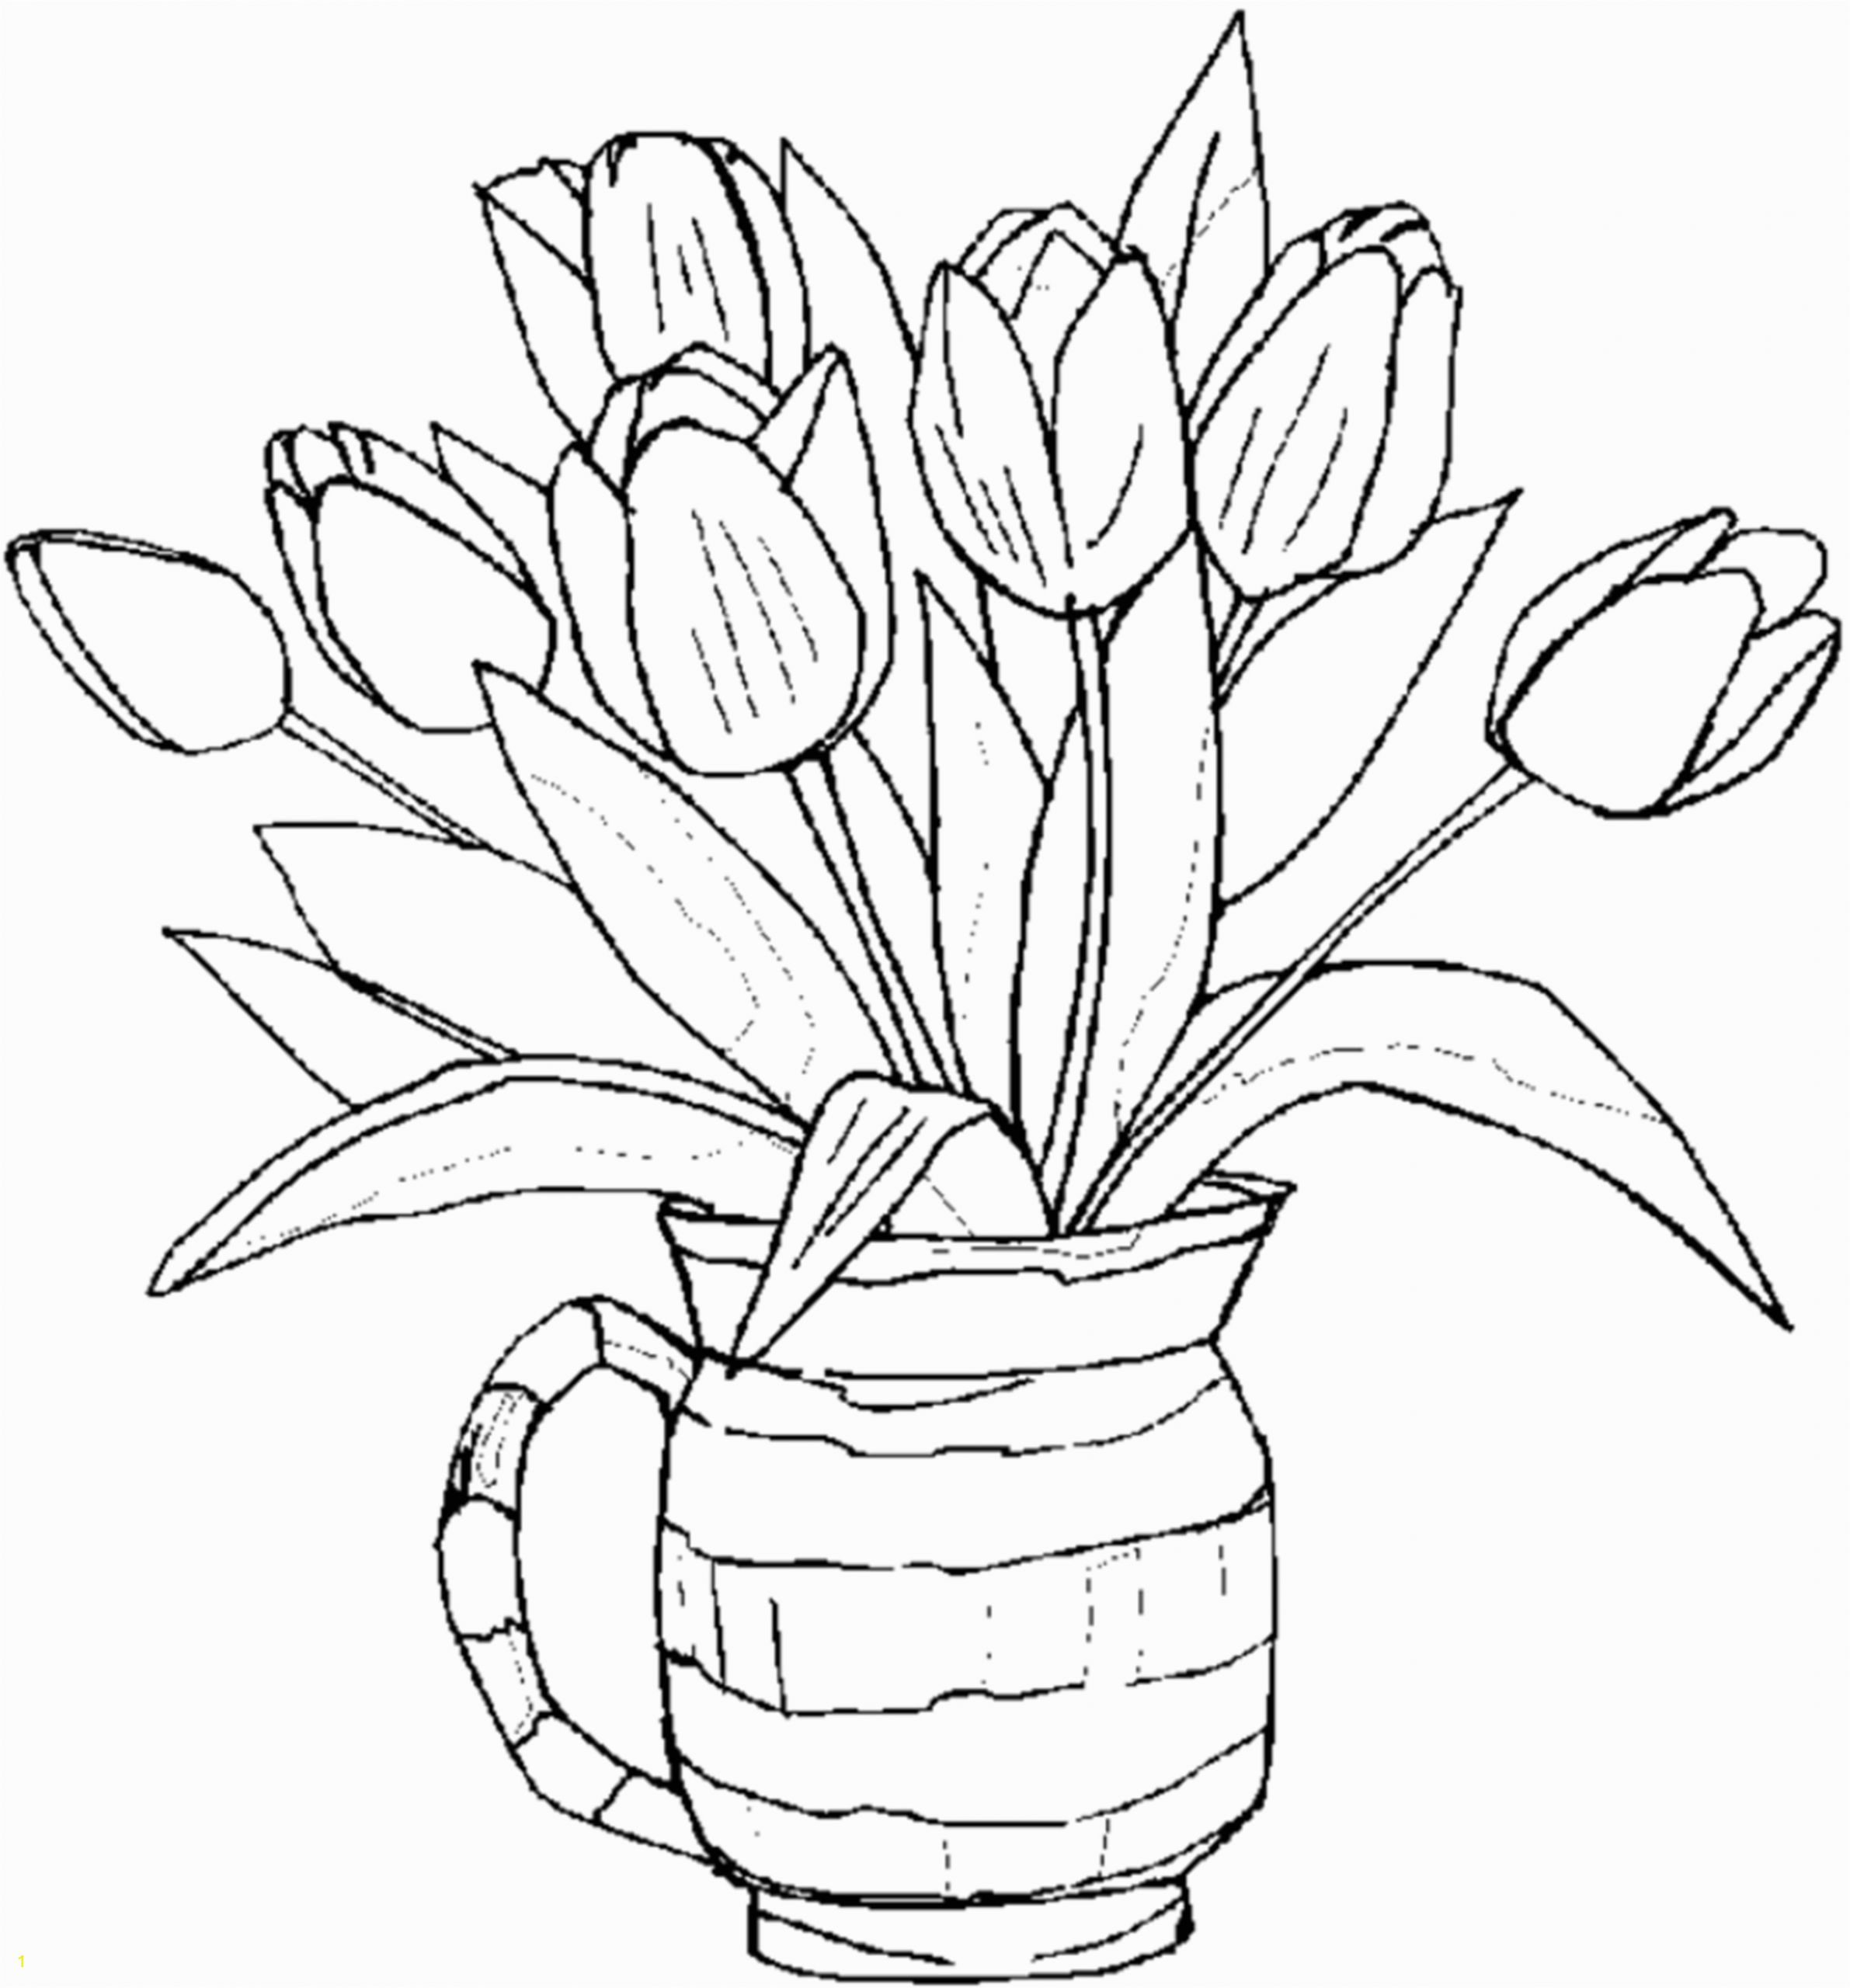 Printable Flower Coloring Pages for Kids Free Printable Flower Coloring Pages for Kids Best